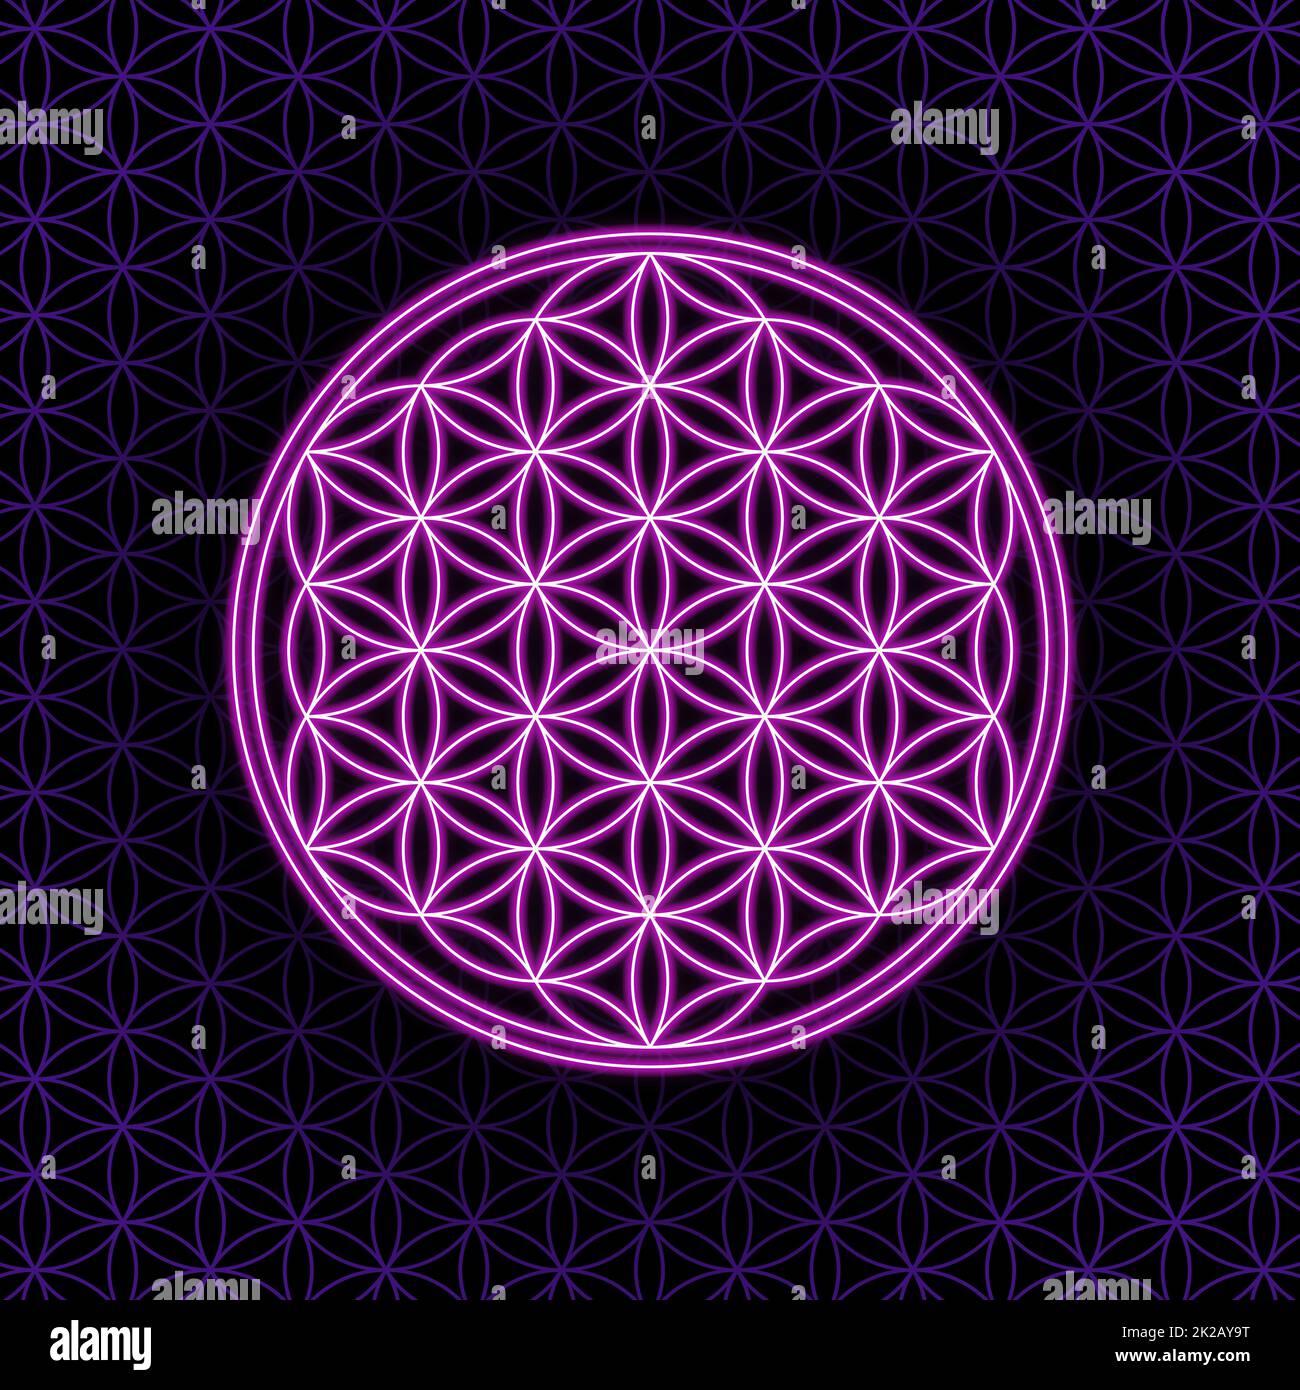 White Flower of Life, with purple glowing borders, over a seamless pattern Stock Photo